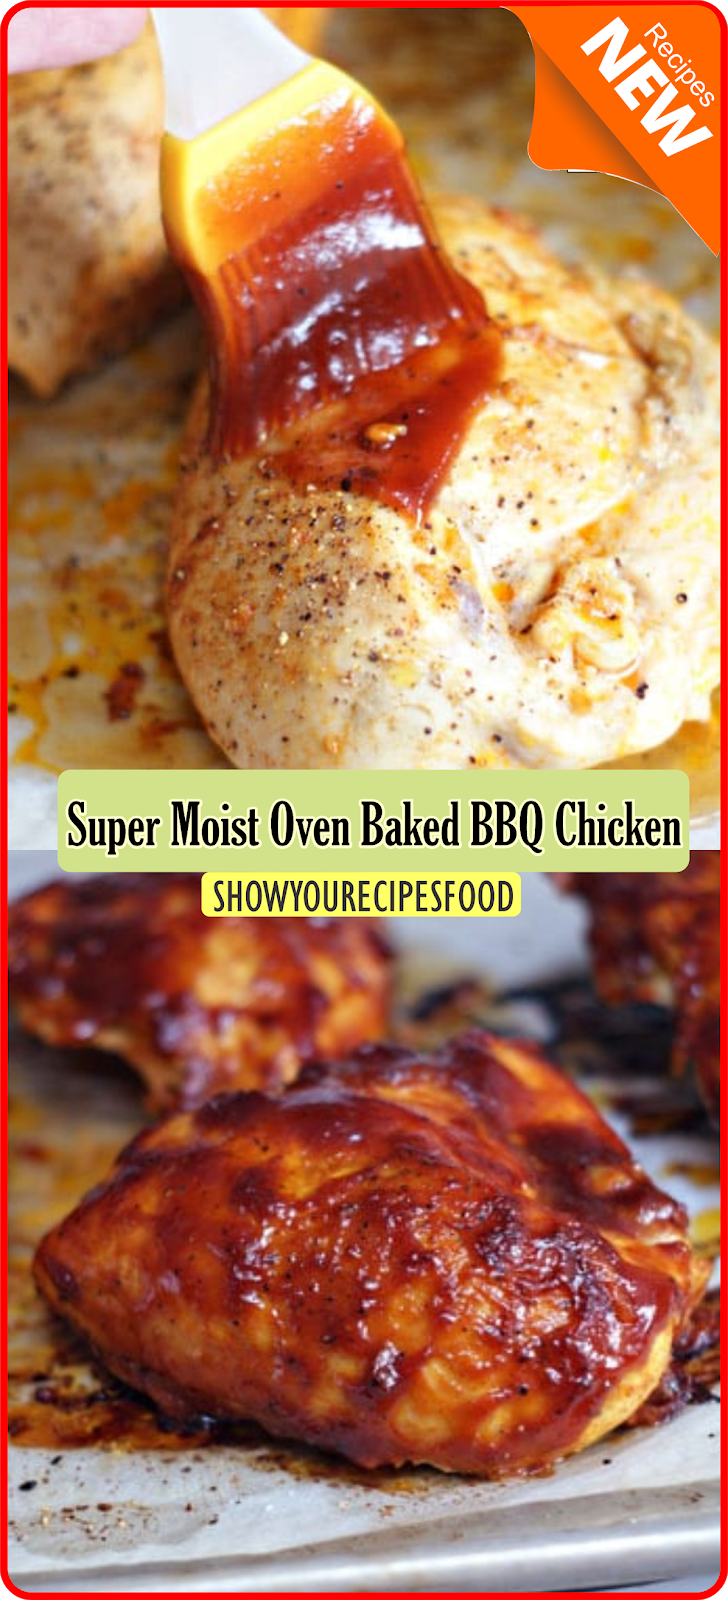 Super Moist Oven Baked BBQ Chicken | Show You Recipes